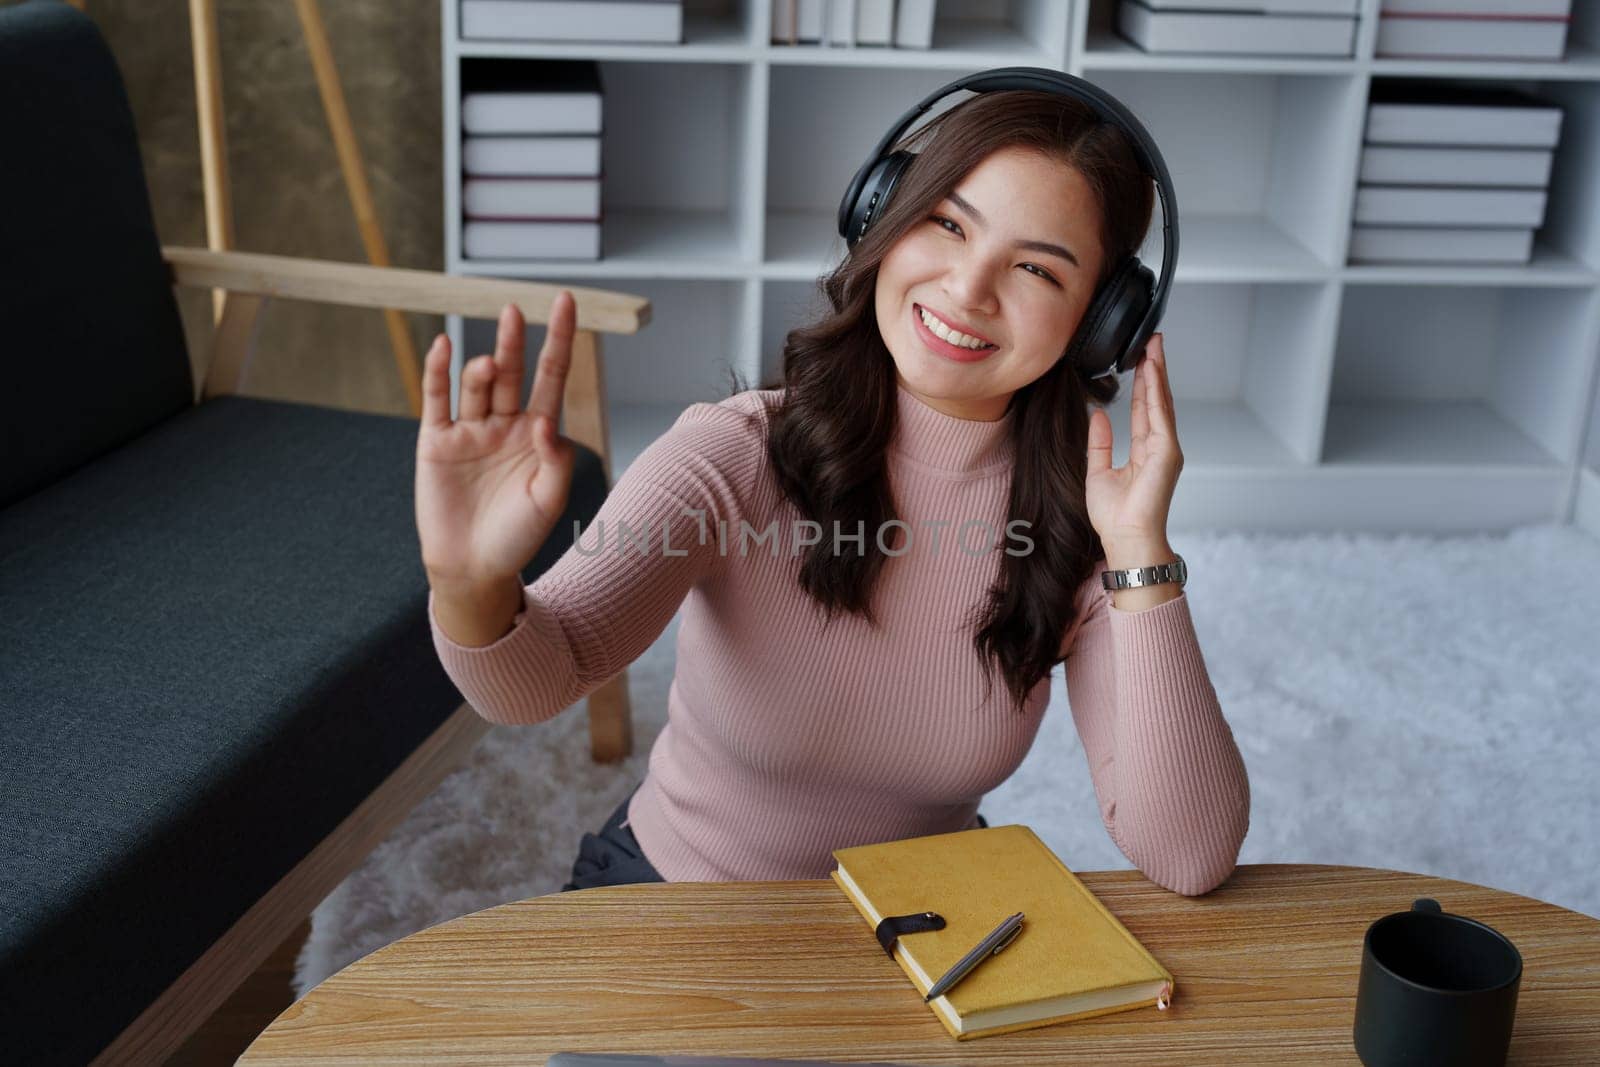 Woman relaxing wearing headphones listening to music in her house